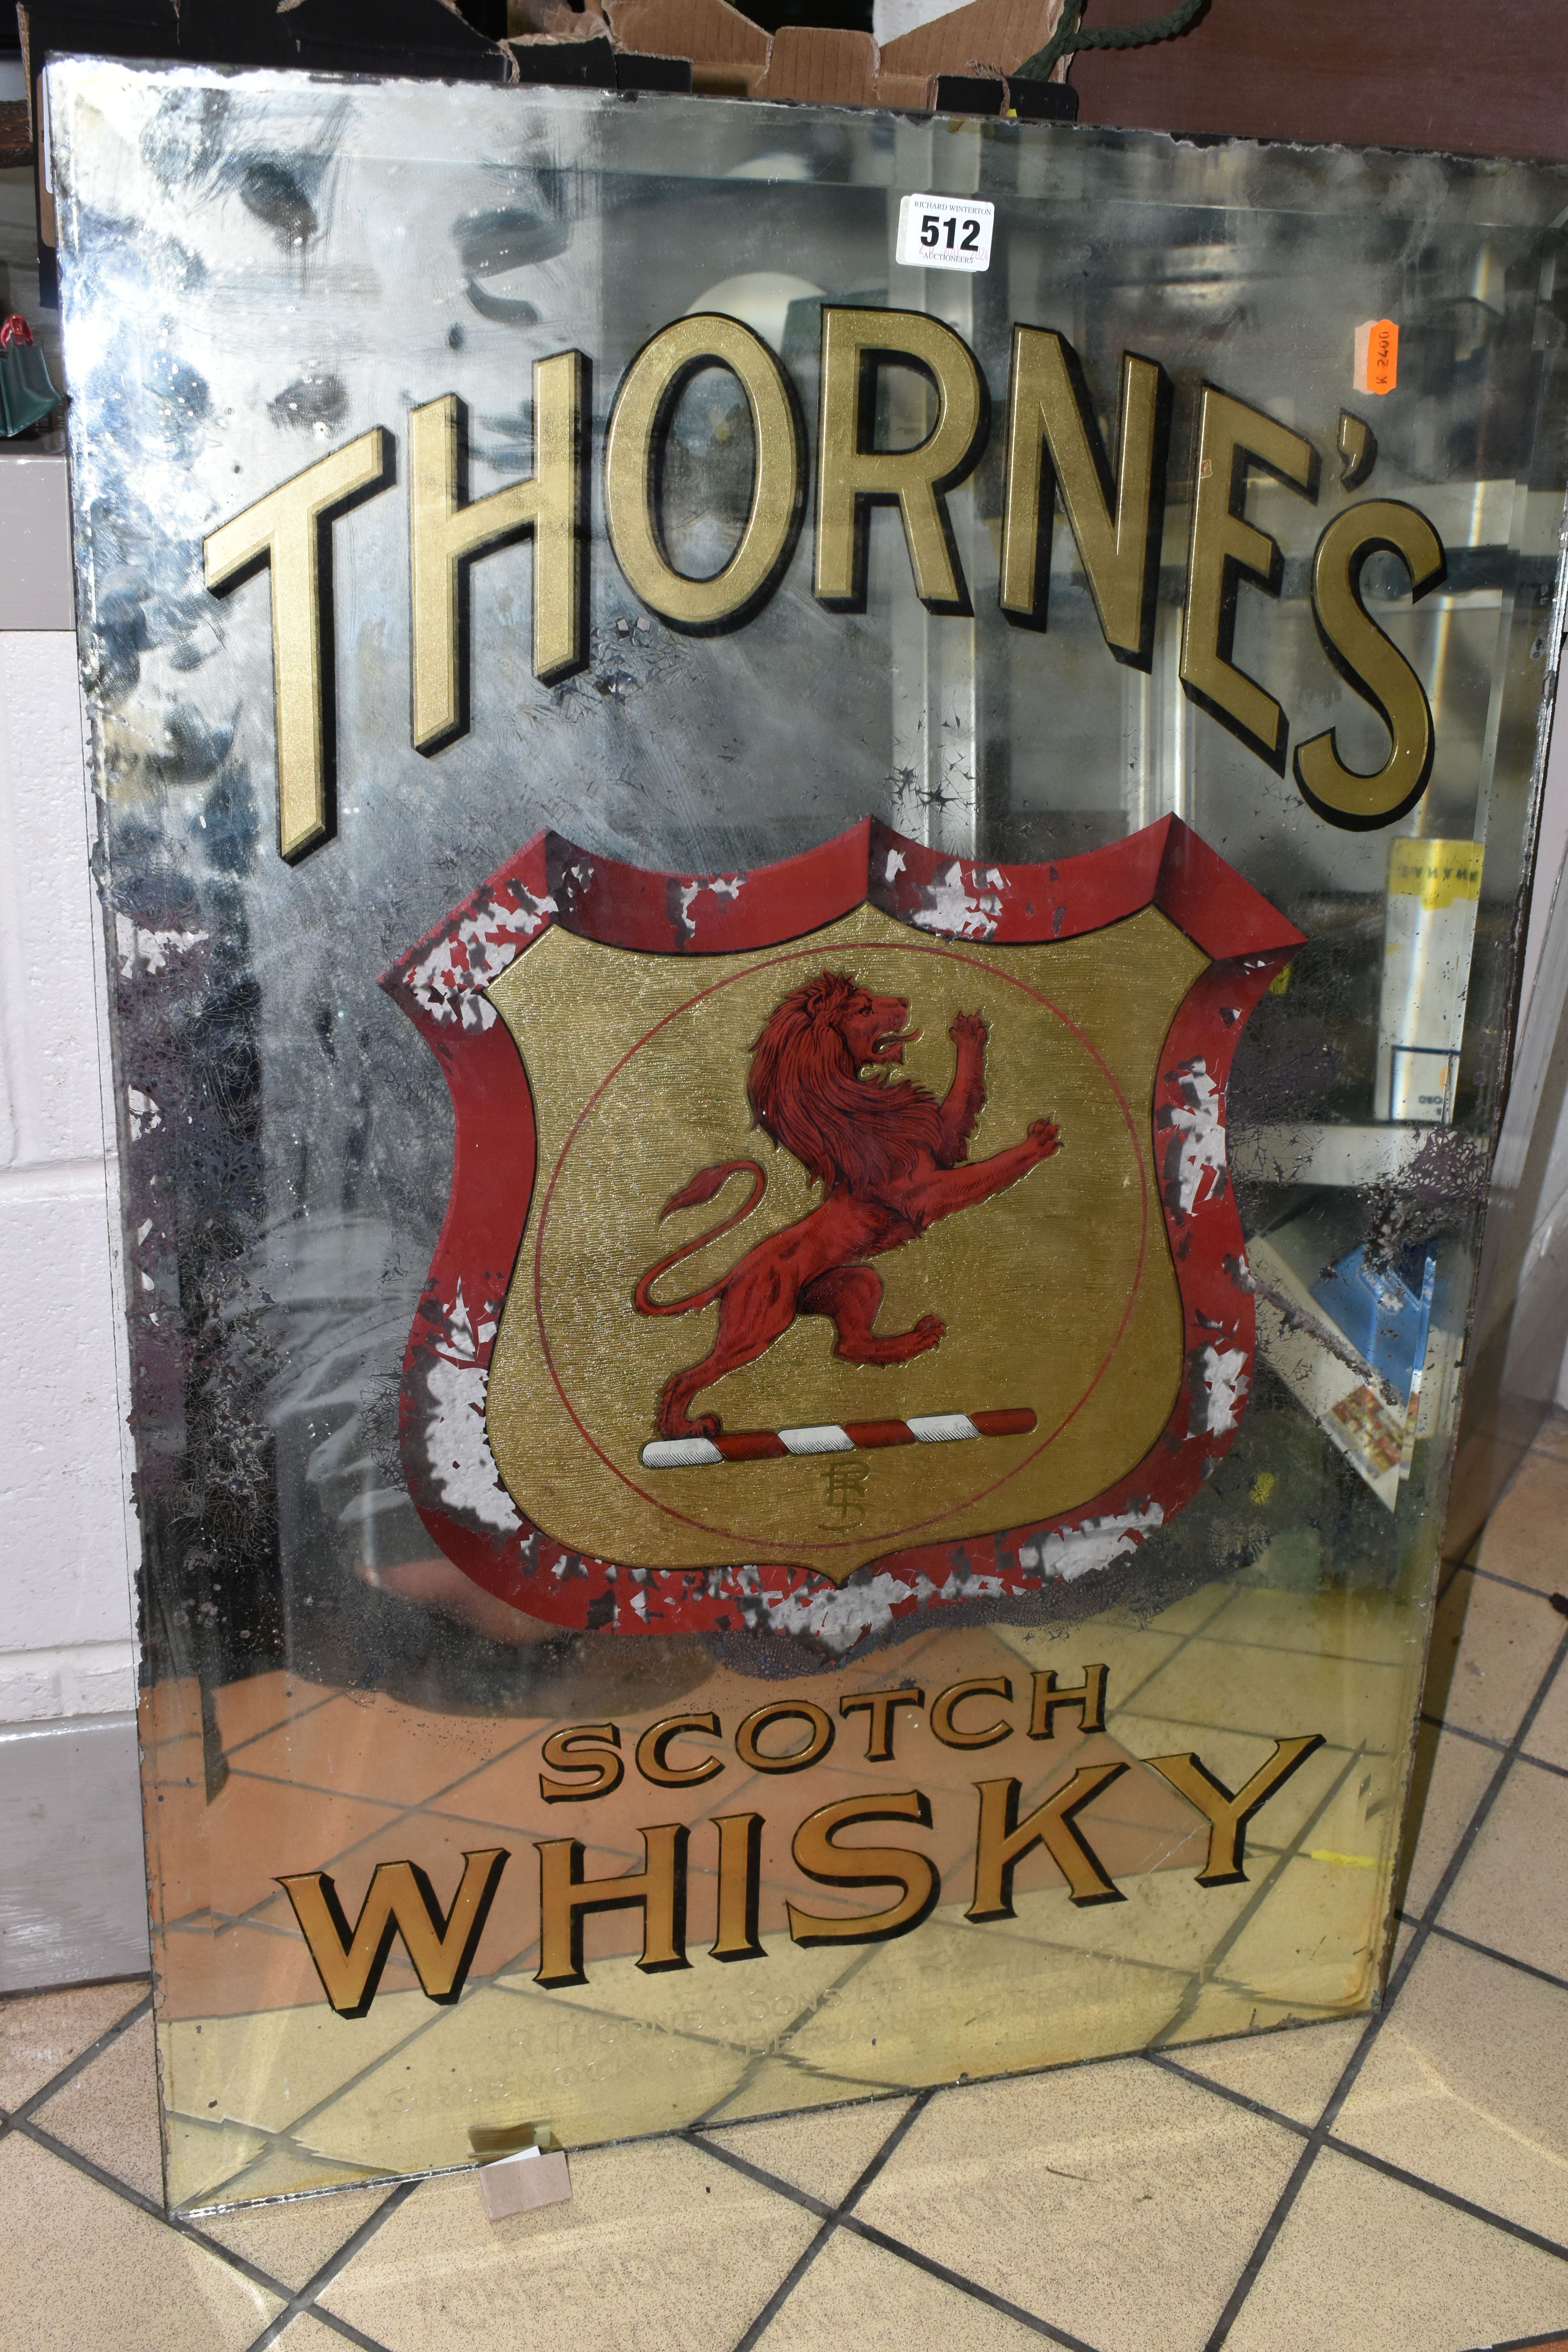 THORNES SCOTCH WHISKY, an unframed original advertising mirror in distressed condition,